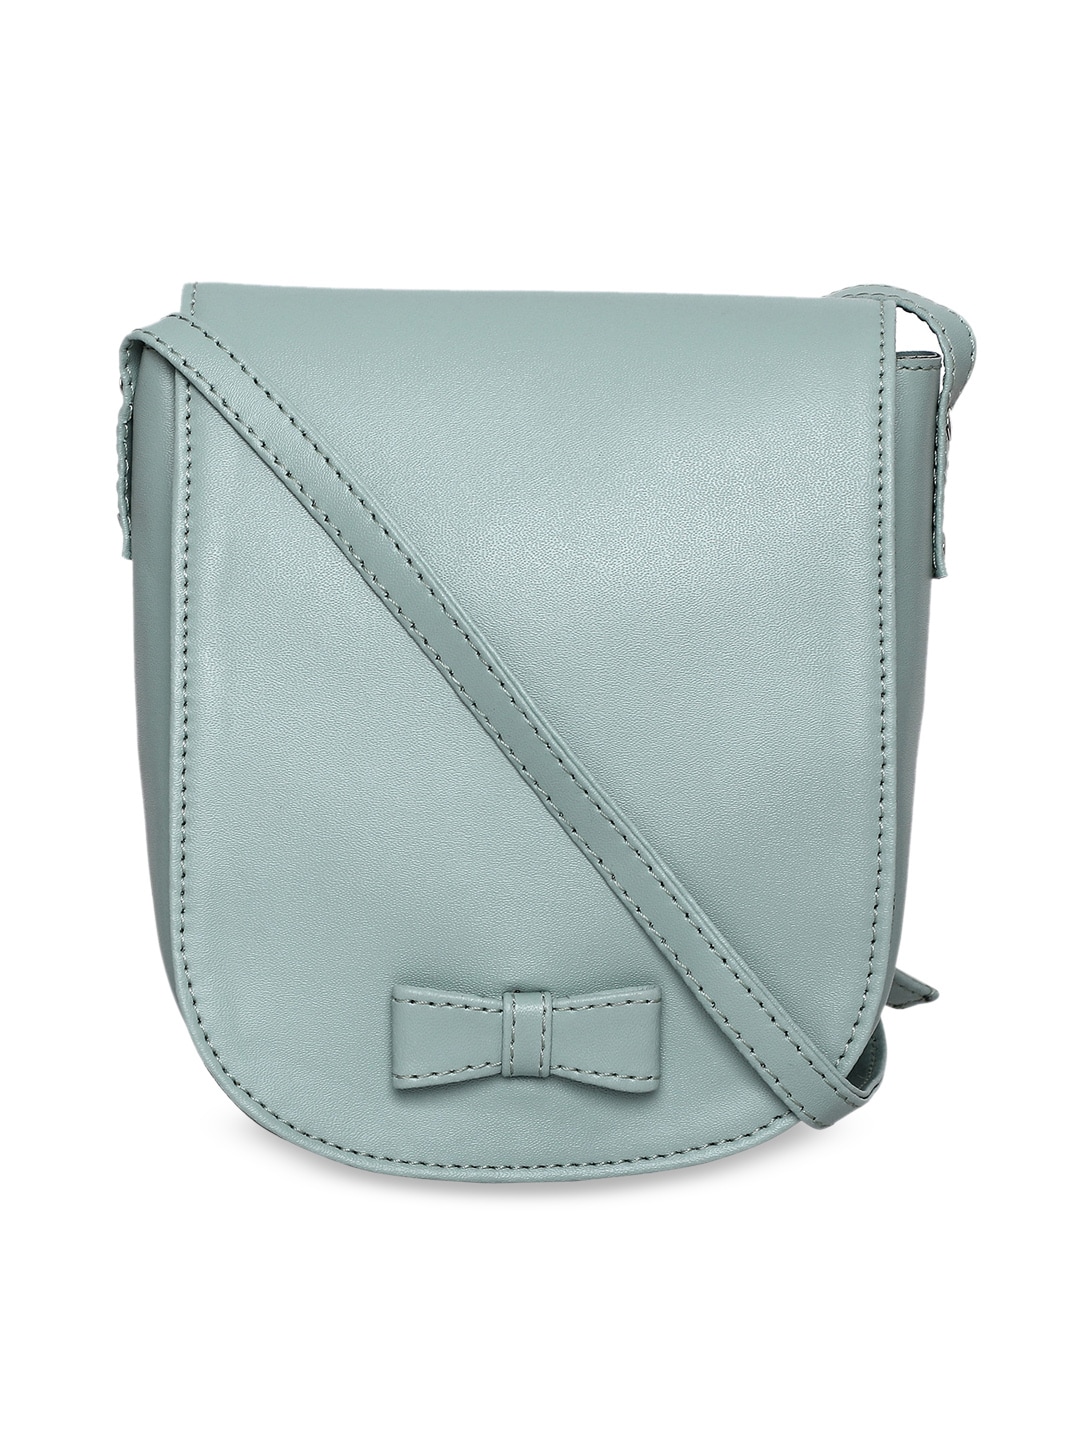 Toteteca Green PU Structured Sling Bag Price in India